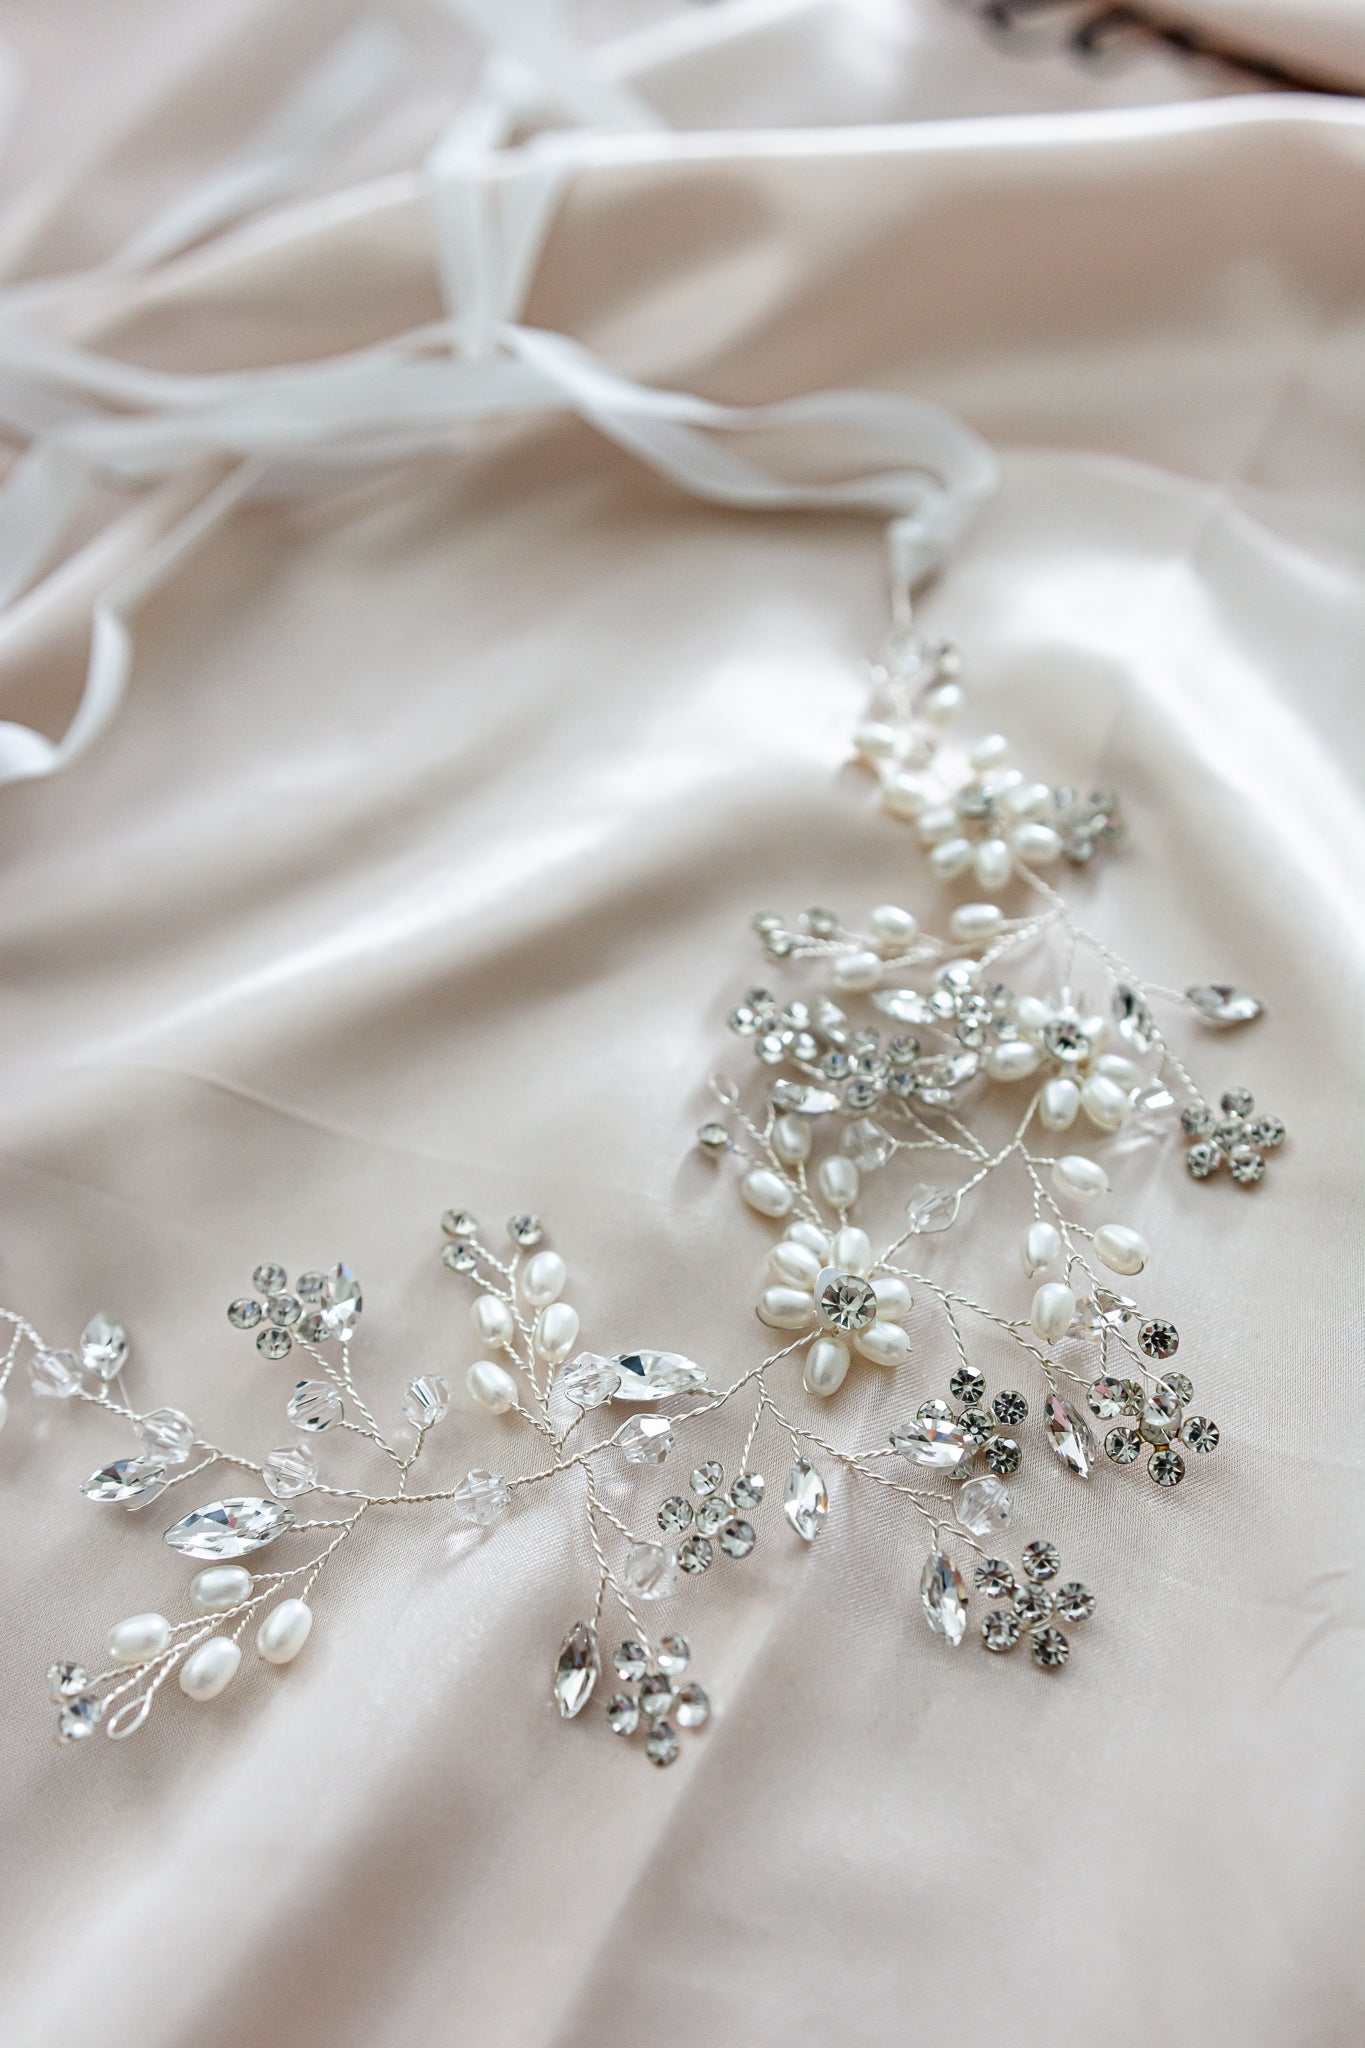 A close up of Aria white wedding floral headpiece with pearls and crystals in satin cloth